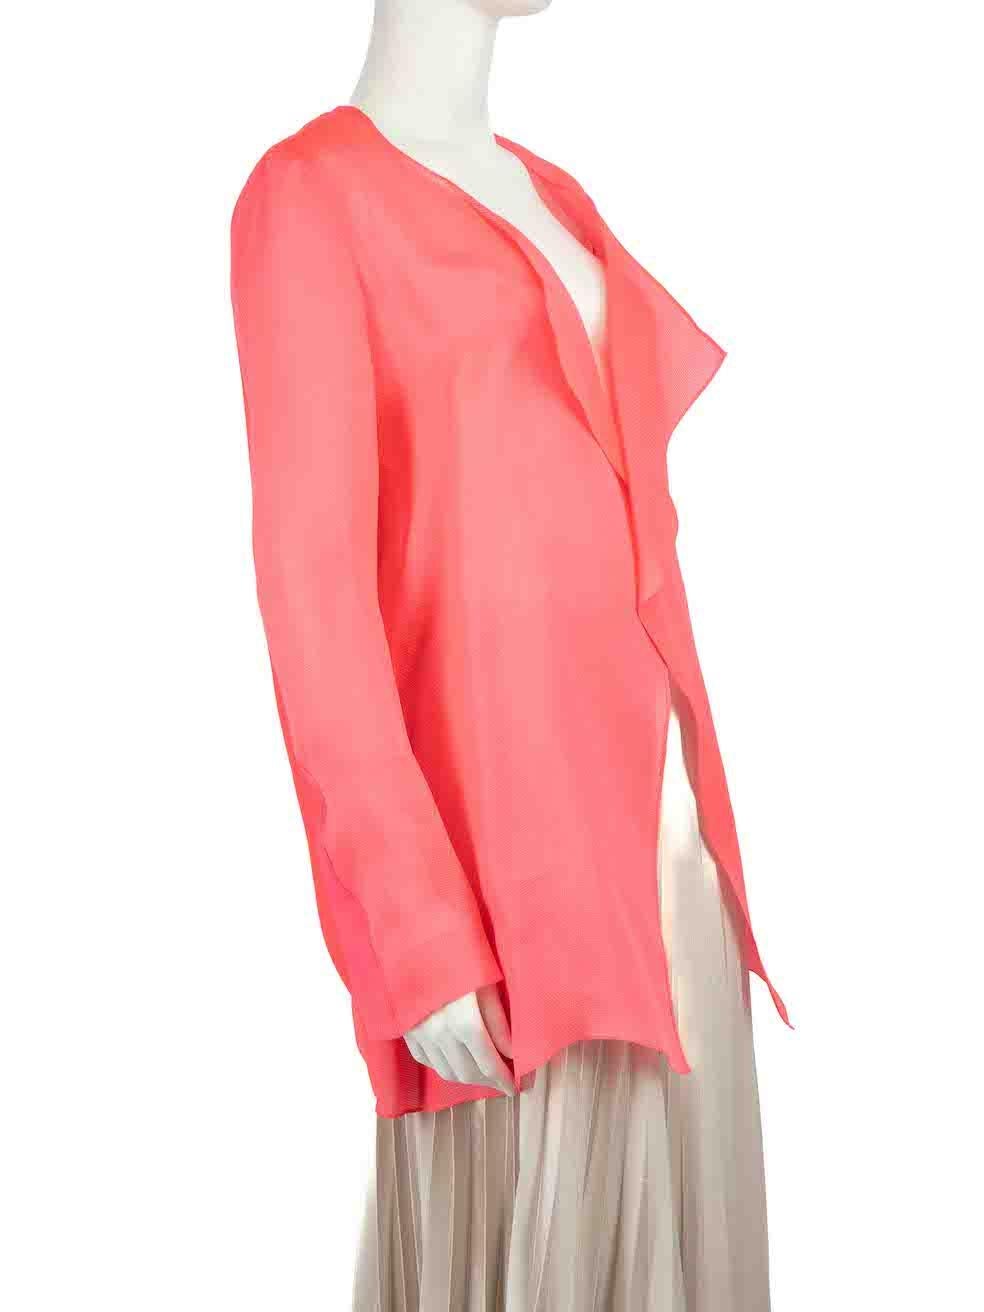 CONDITION is Very good. Minimal wear to blazer is evident. Minimal wear to the right sleeve with marks to the silk and the right underarm seam shows evidence of stretching on this used Roksanda Ilincic designer resale item.
 
 
 
 Details
 
 
 Neon